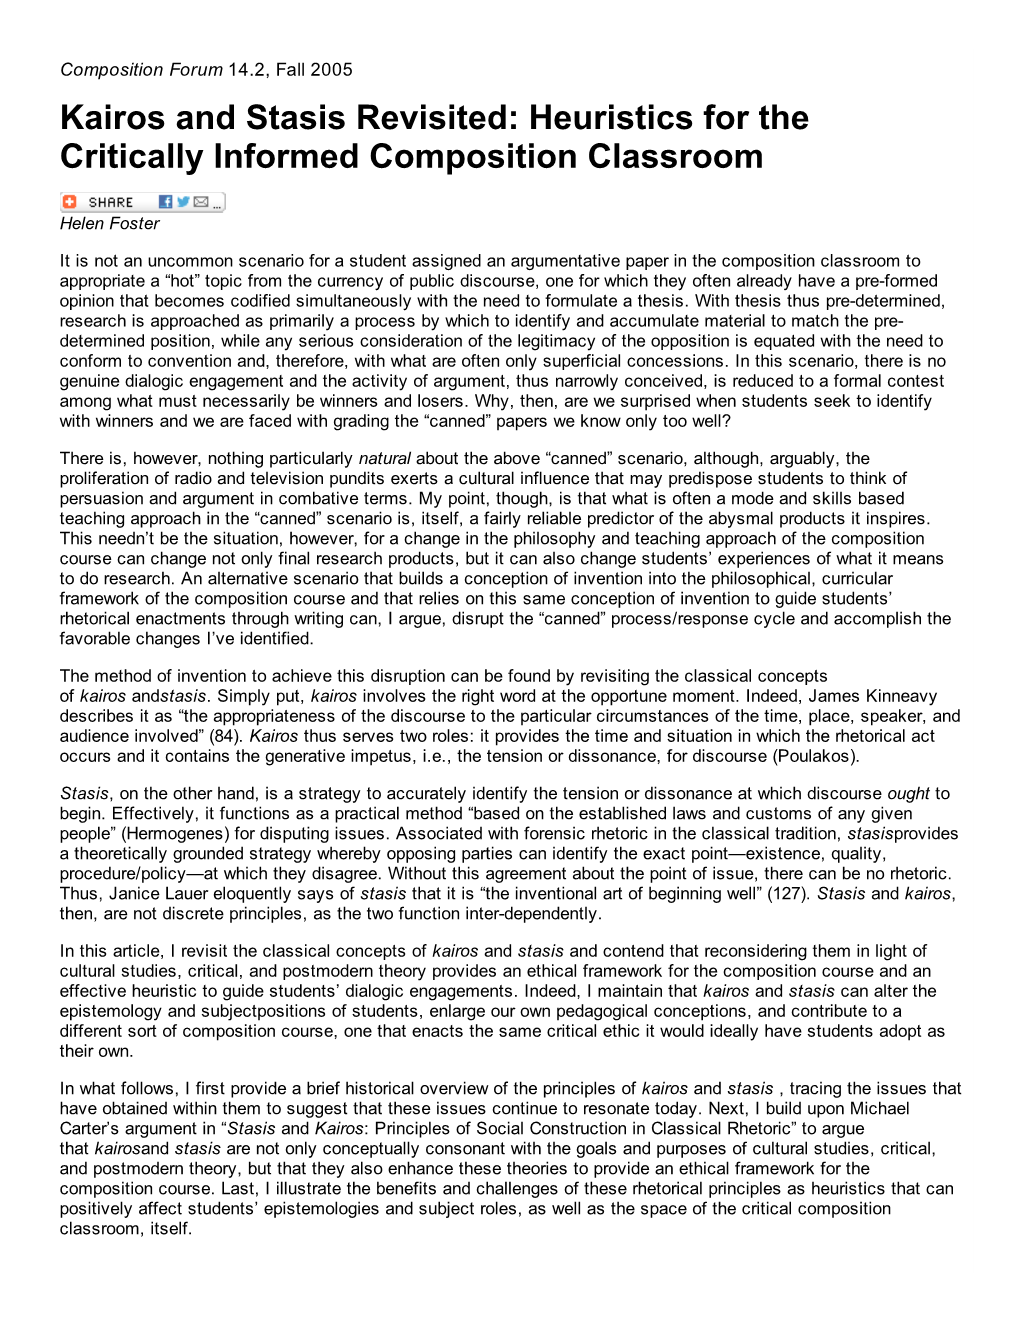 Kairos and Stasis Revisited: Heuristics for the Critically Informed Composition Classroom